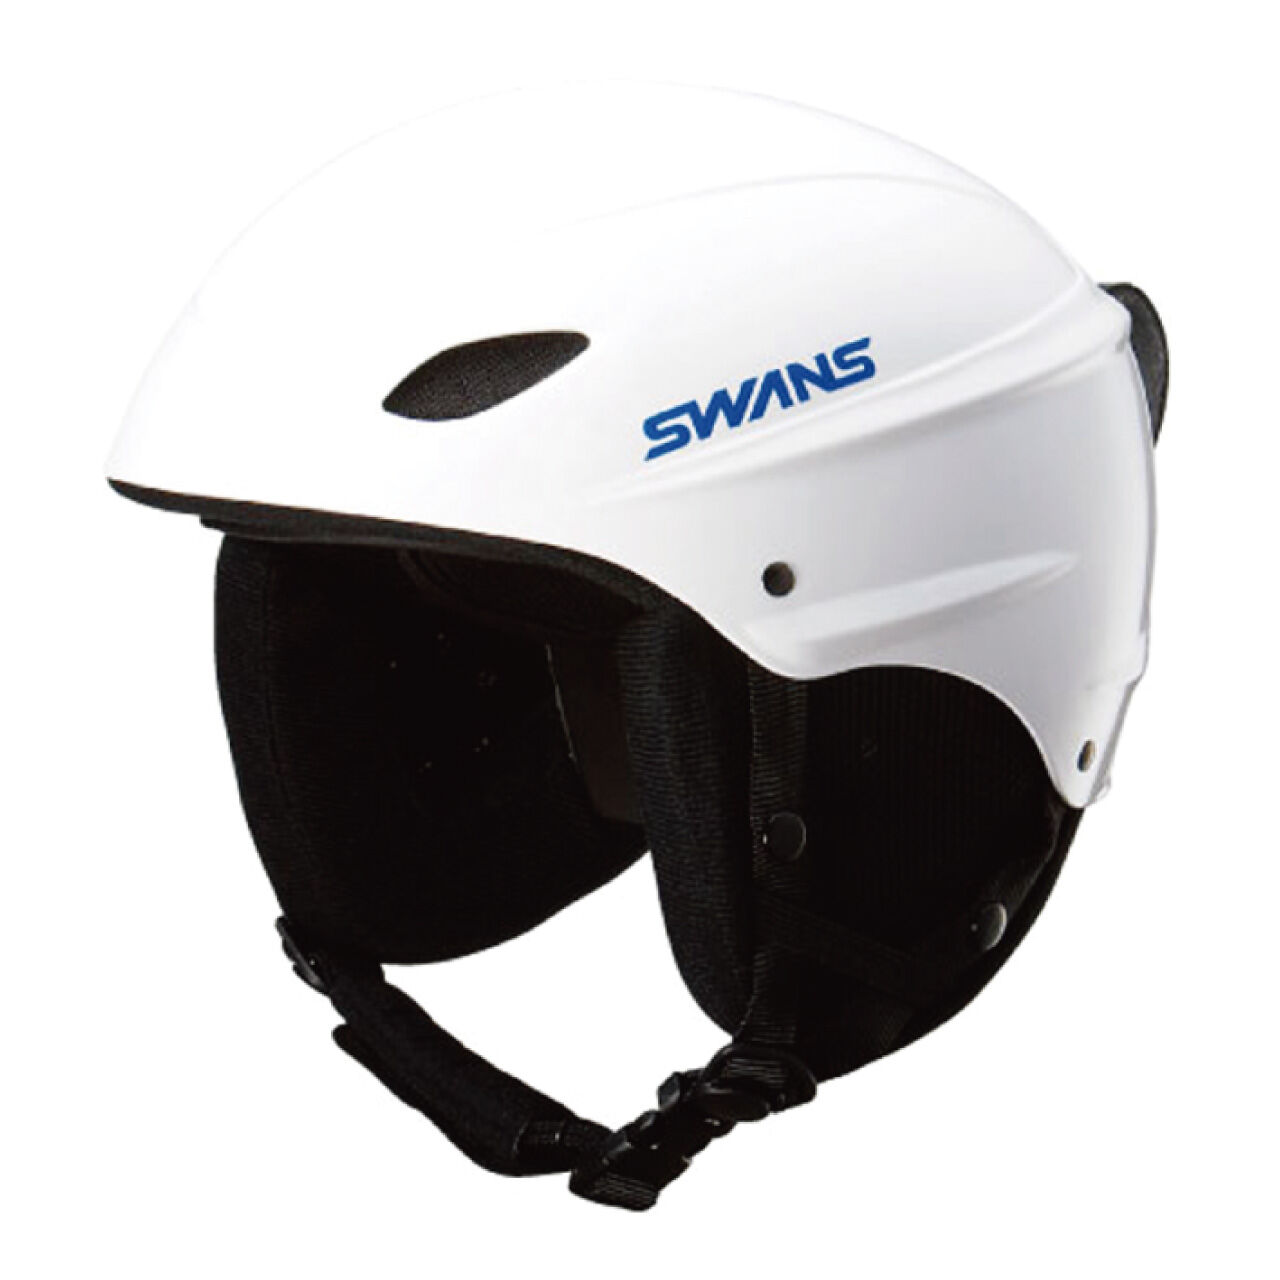 H-451R snow helmet White S size,Opt1, large image number 0